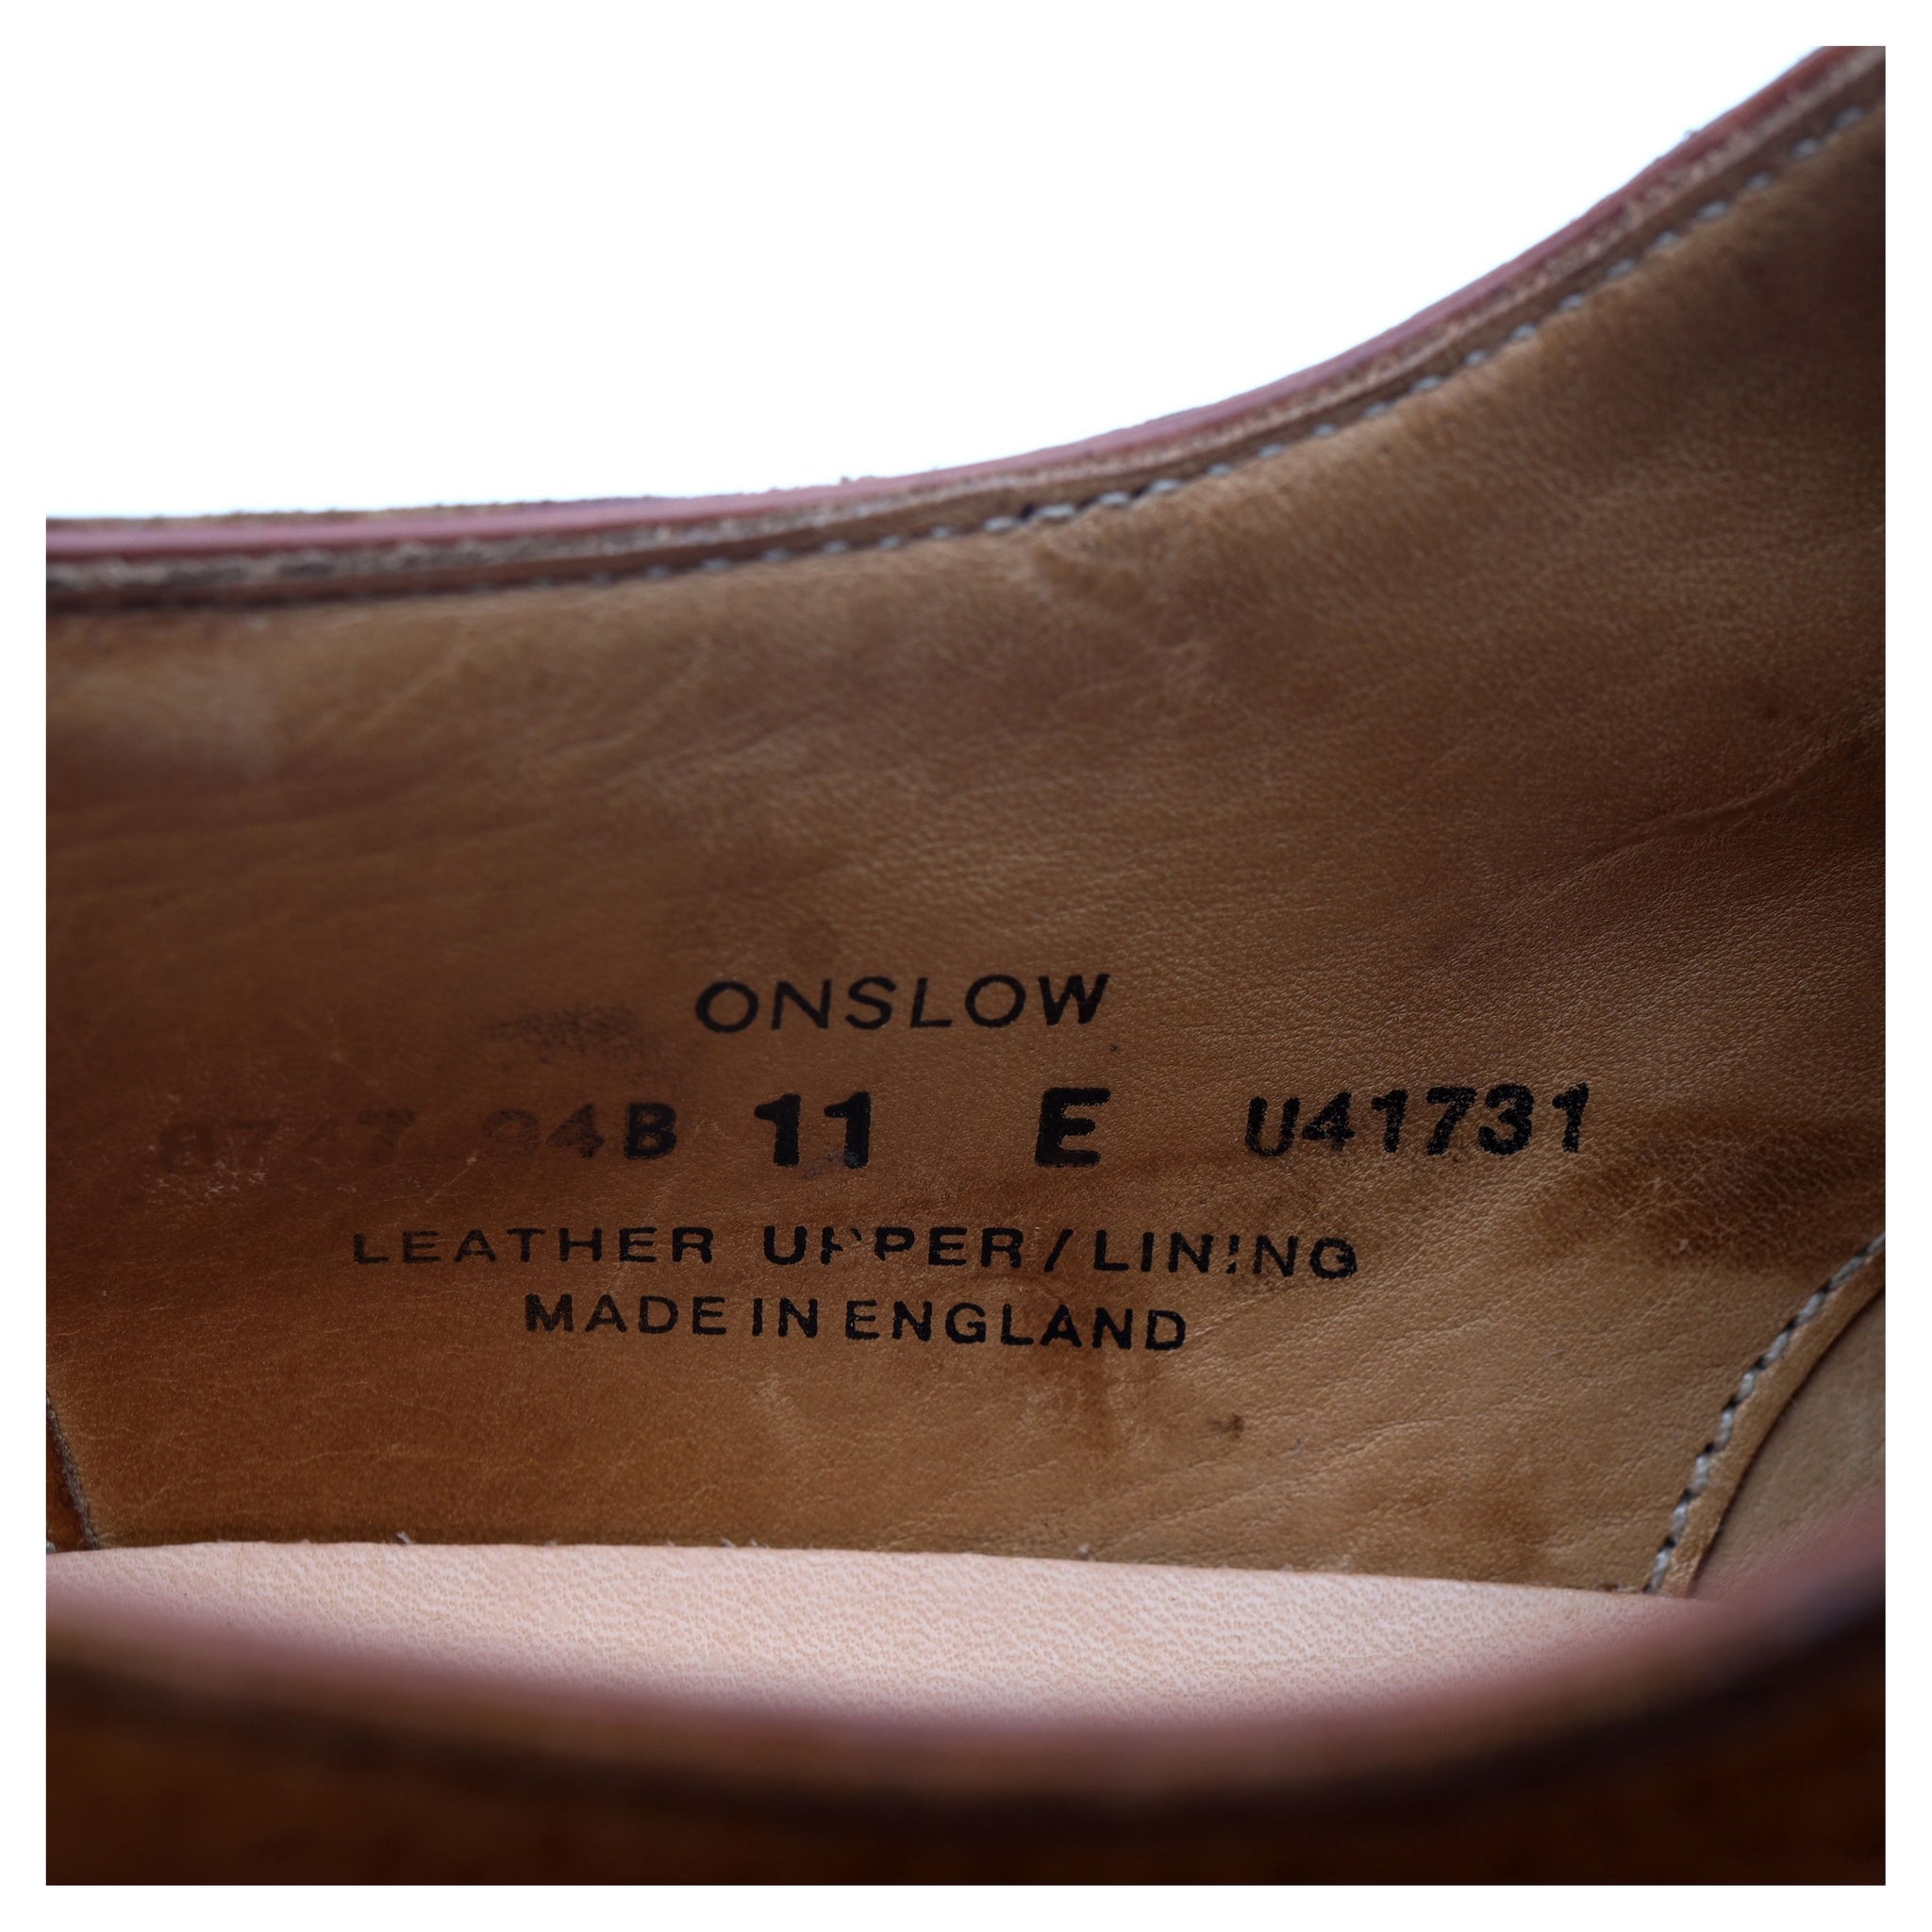 Onslow' Tan Brown Leather Apron Derby UK 11 E - Abbot's Shoes